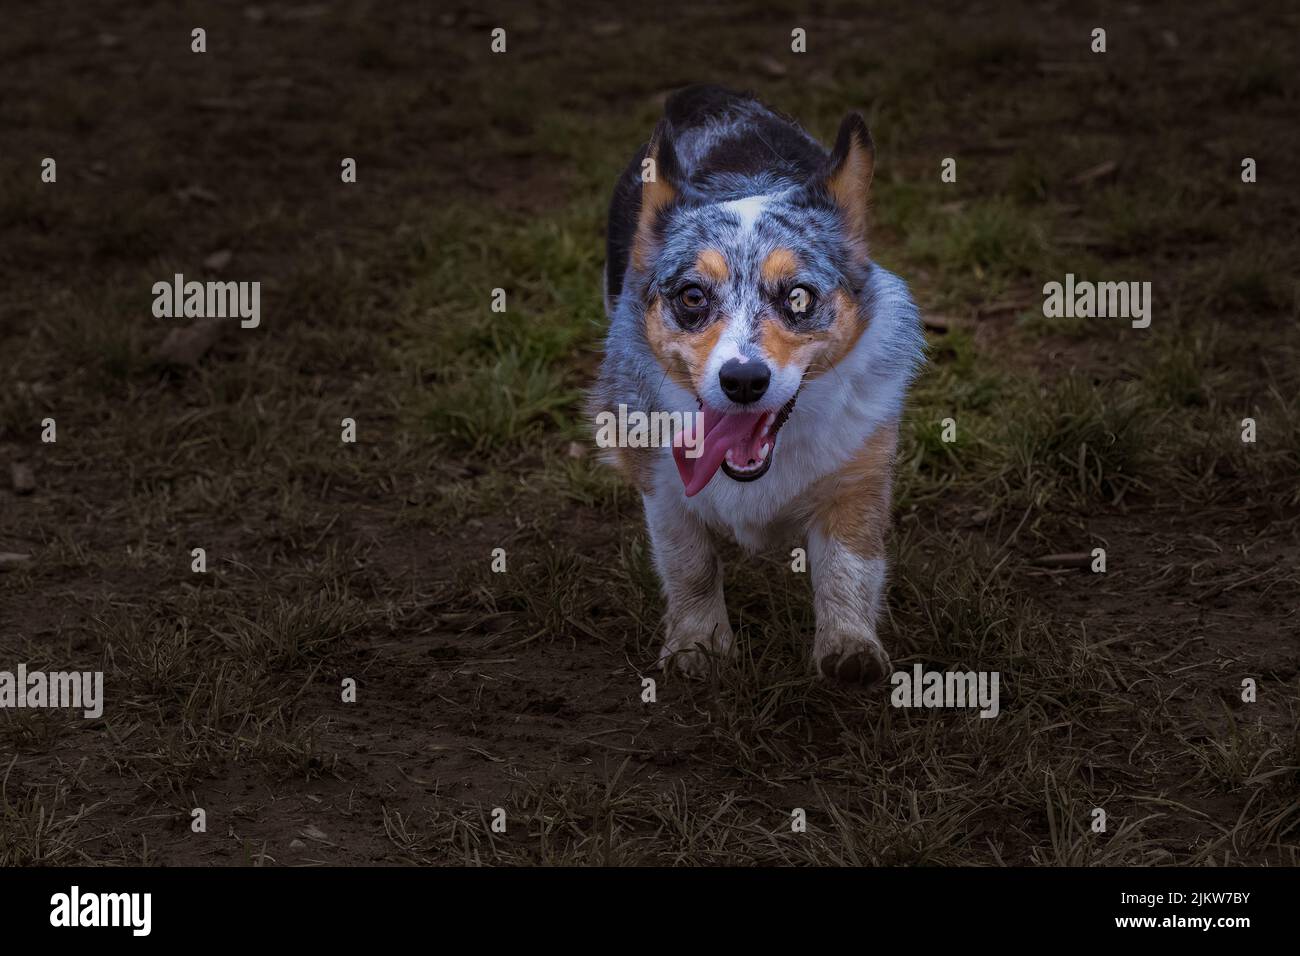 A TRI COLORED CORGI STARING INTO THE CAMERA AS IT RUNS ACROSS A MUDDY FIELD WITH ITS MOUTH OPEN AND TOUNGE OUT WITH A FADED AND SUBDUDED BACKGROUND Stock Photo